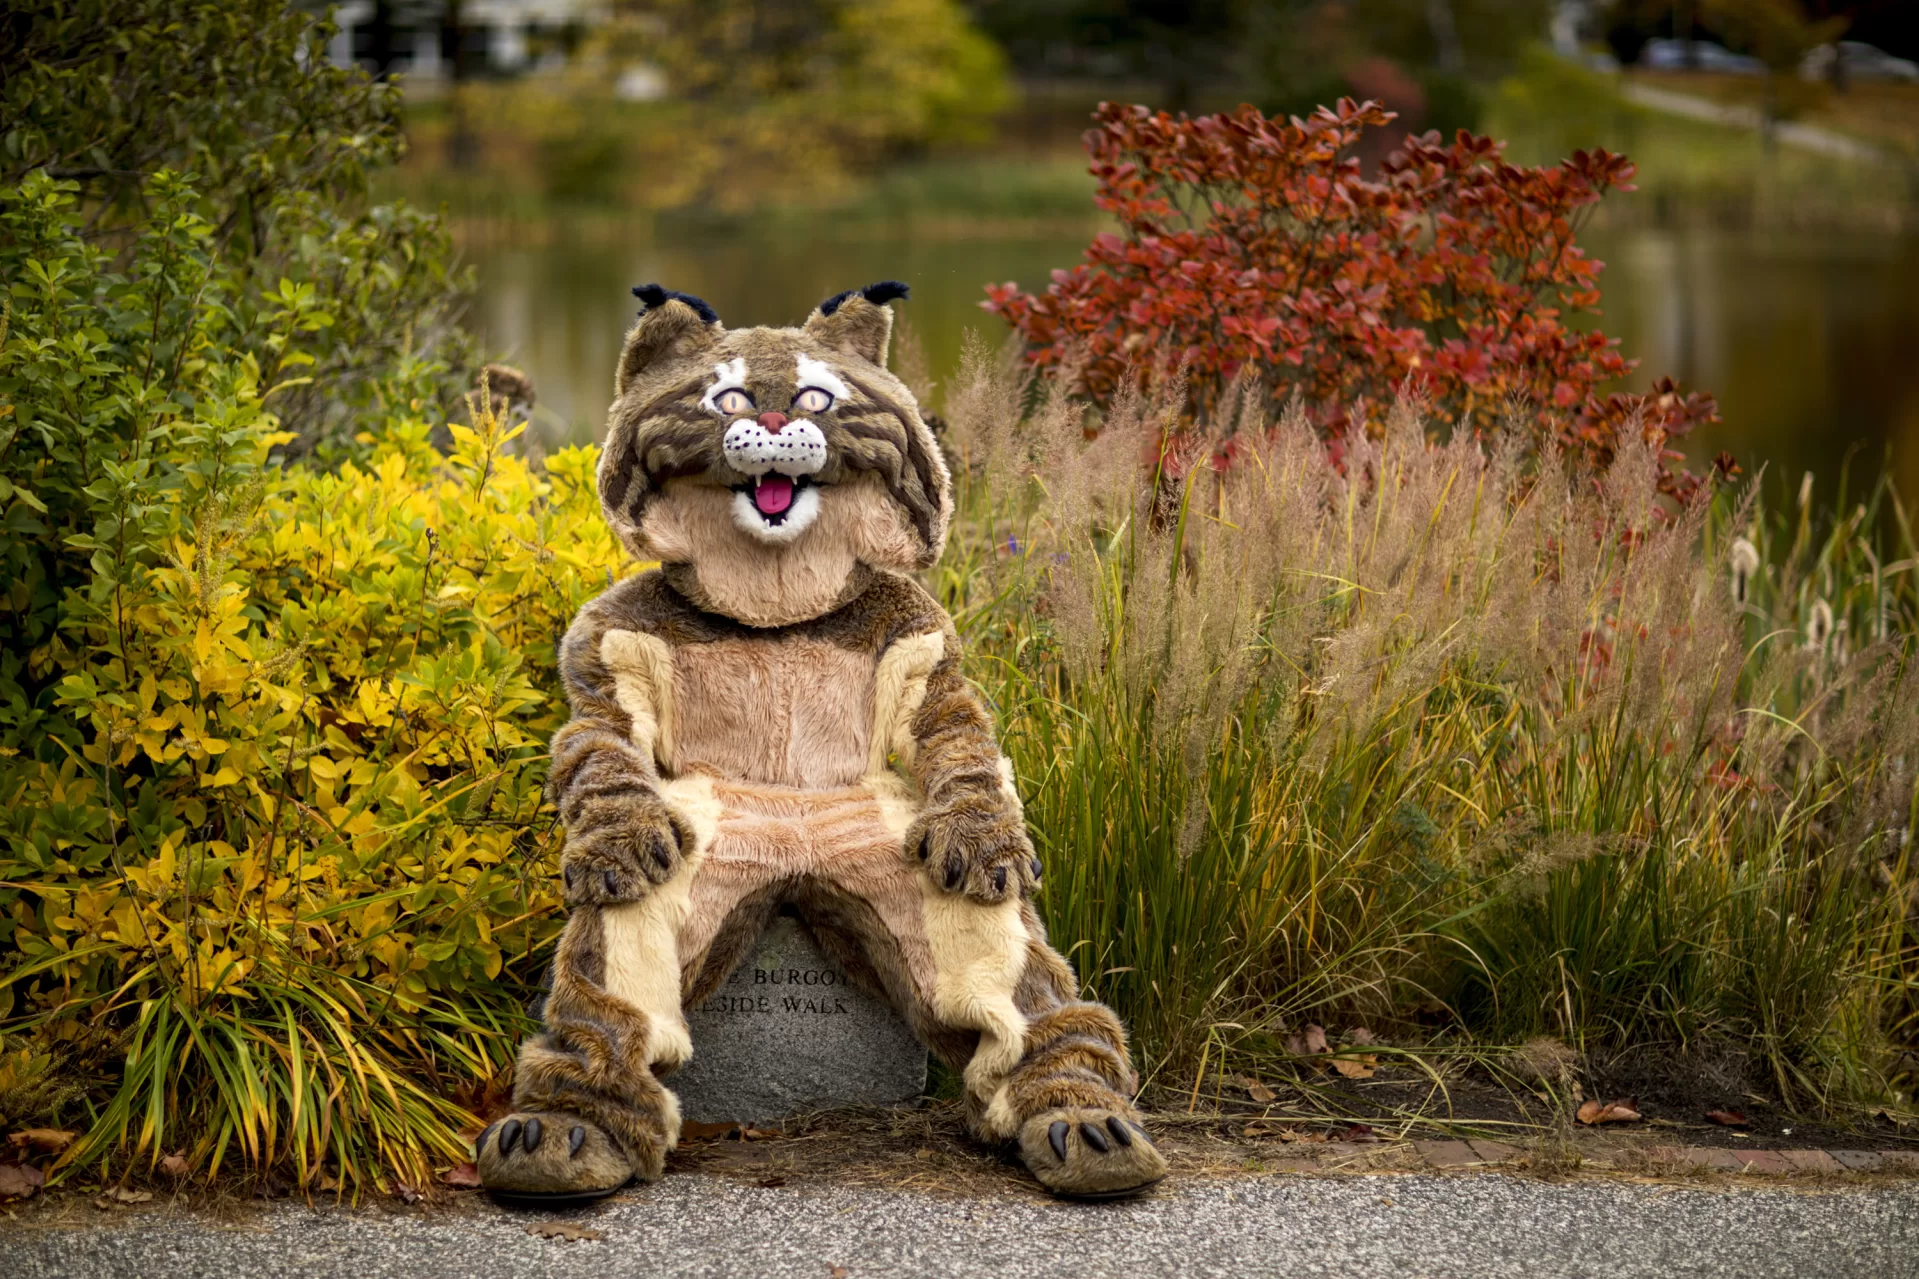 The Bates Bobcat swings through campus during the height of fall foliage.